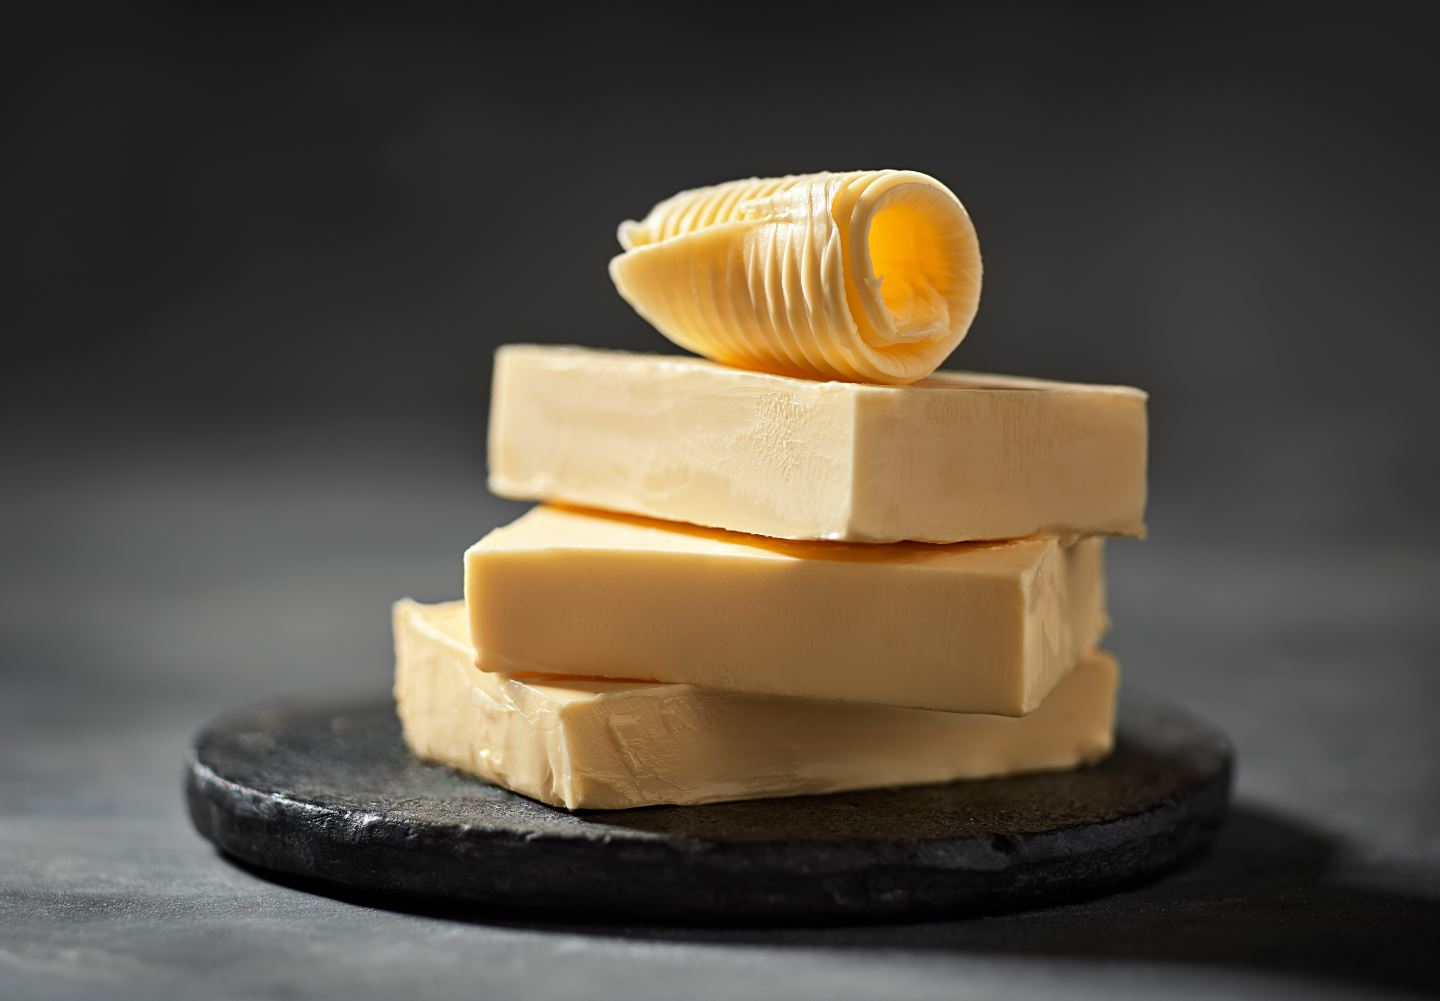 Valio butter places ‘Best of Class’ in world championship contest